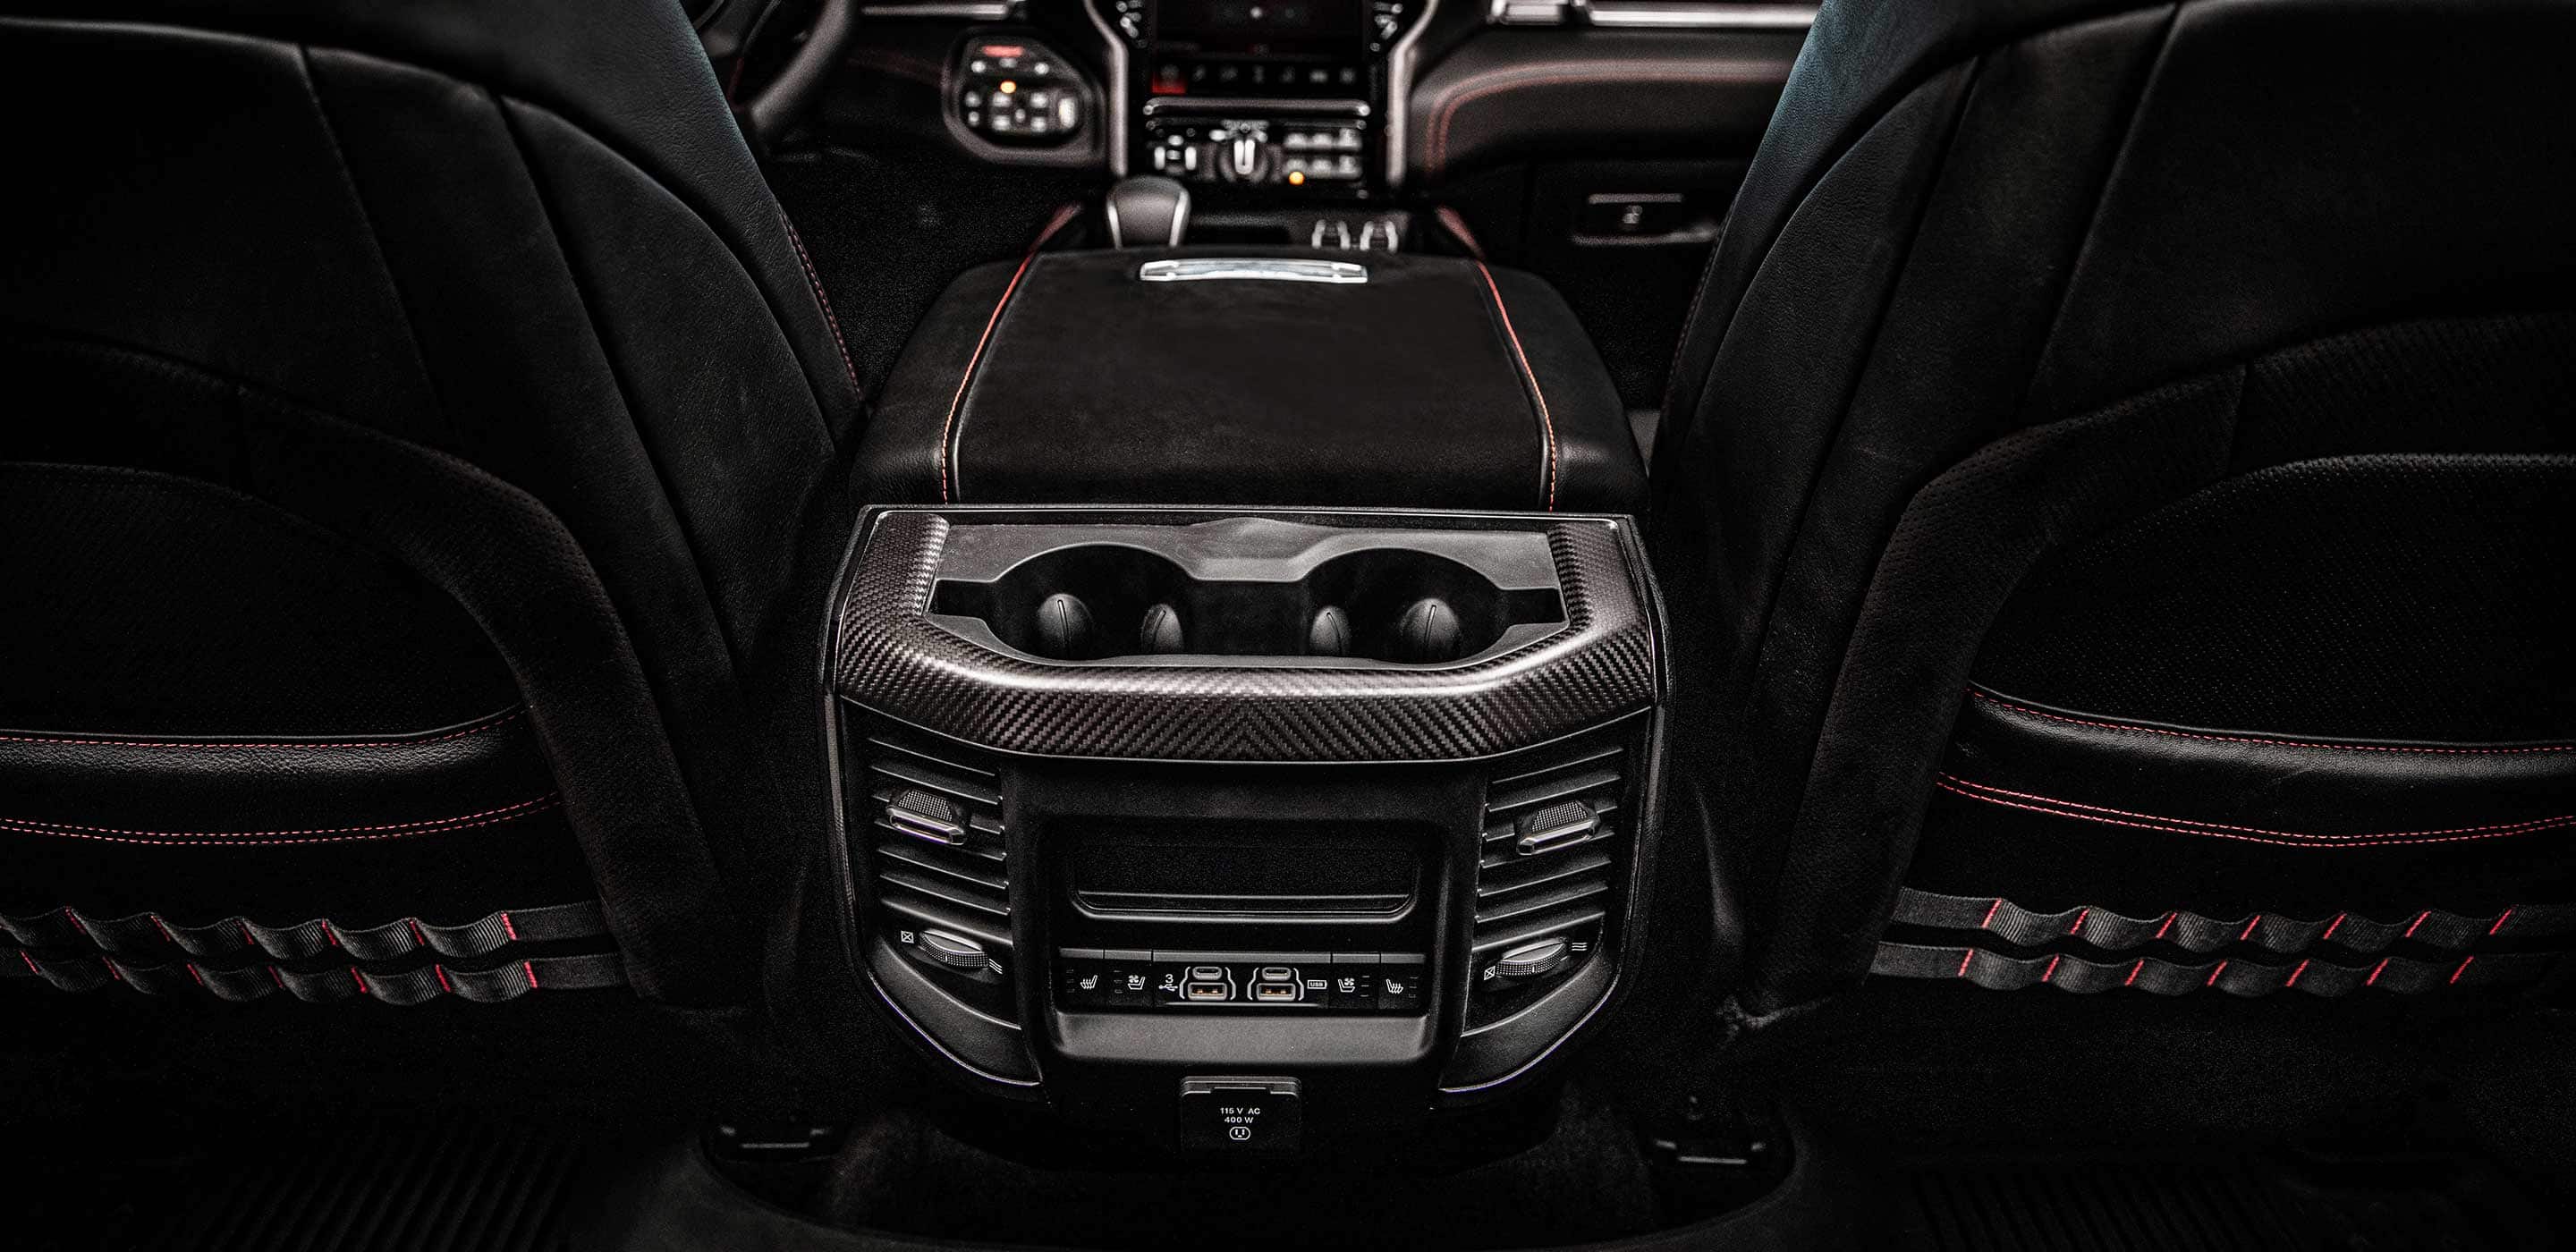 Interior Images of the Ram 1500 TRX